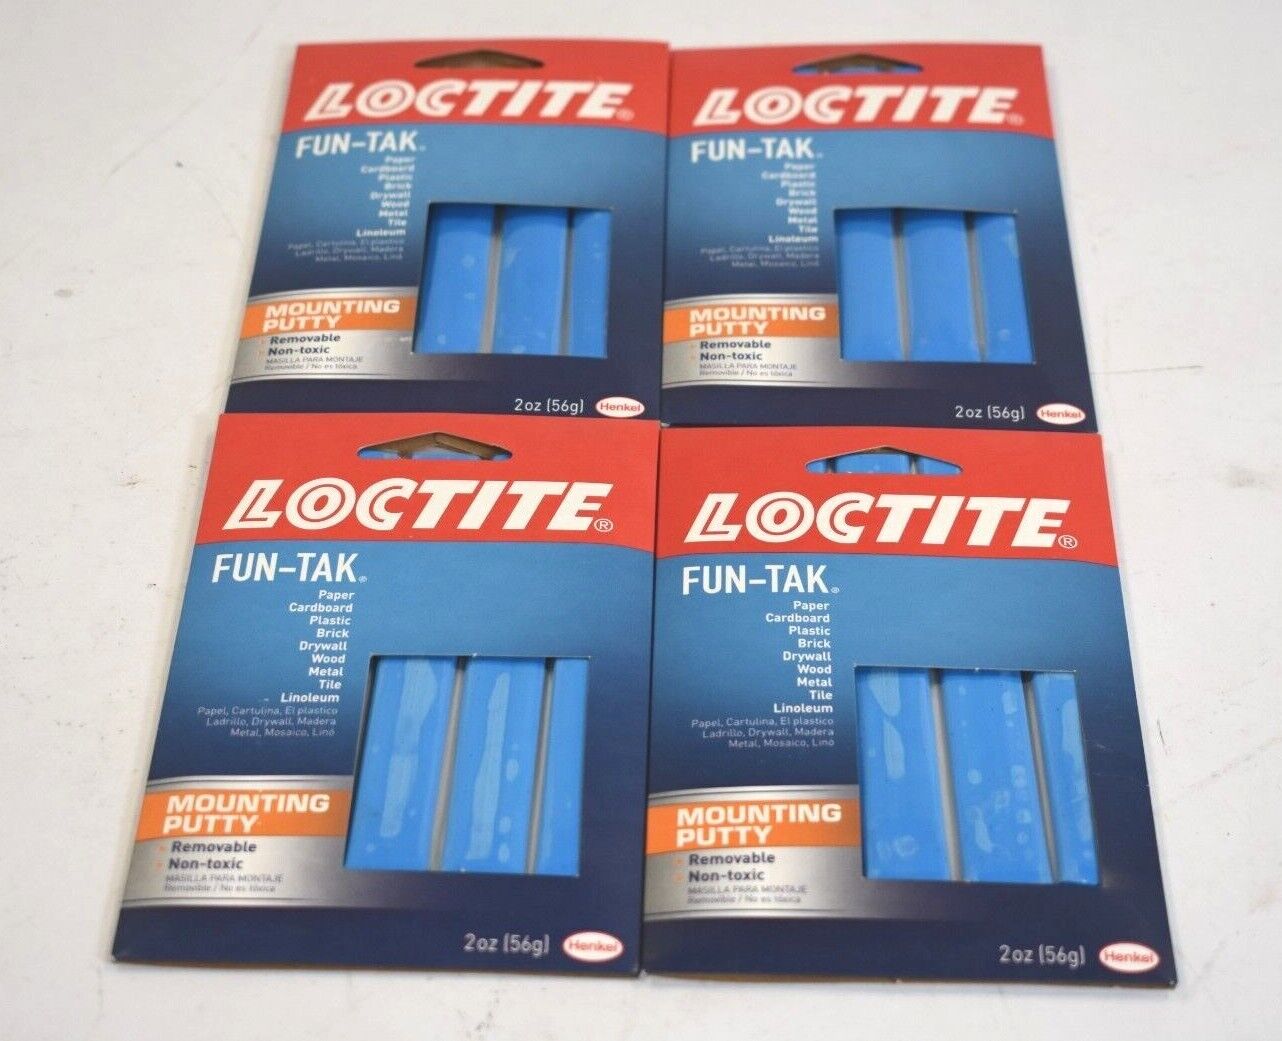 Loctite Fun-Tak Mounting Putty Adhesive Reusable Non-toxic Blue Pack of 4 Loctite